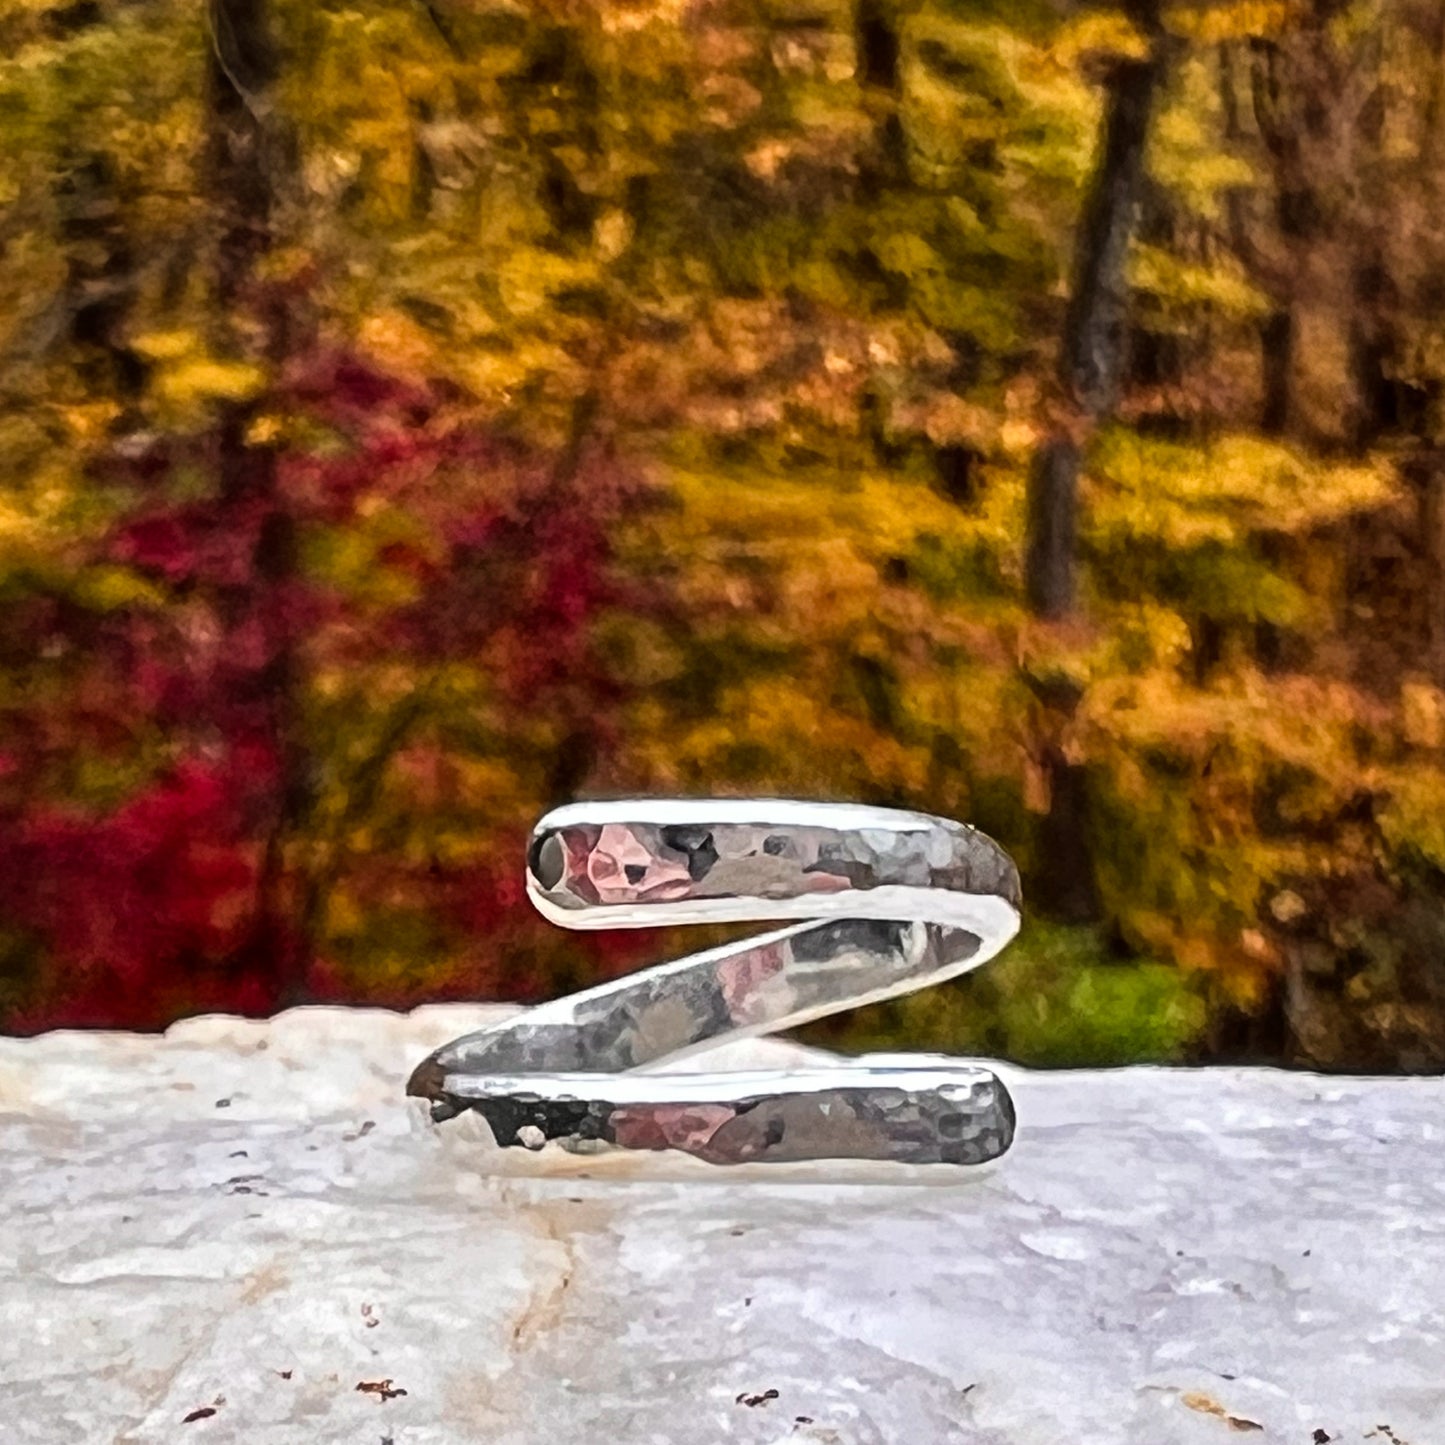 Embrace Ring in Silver